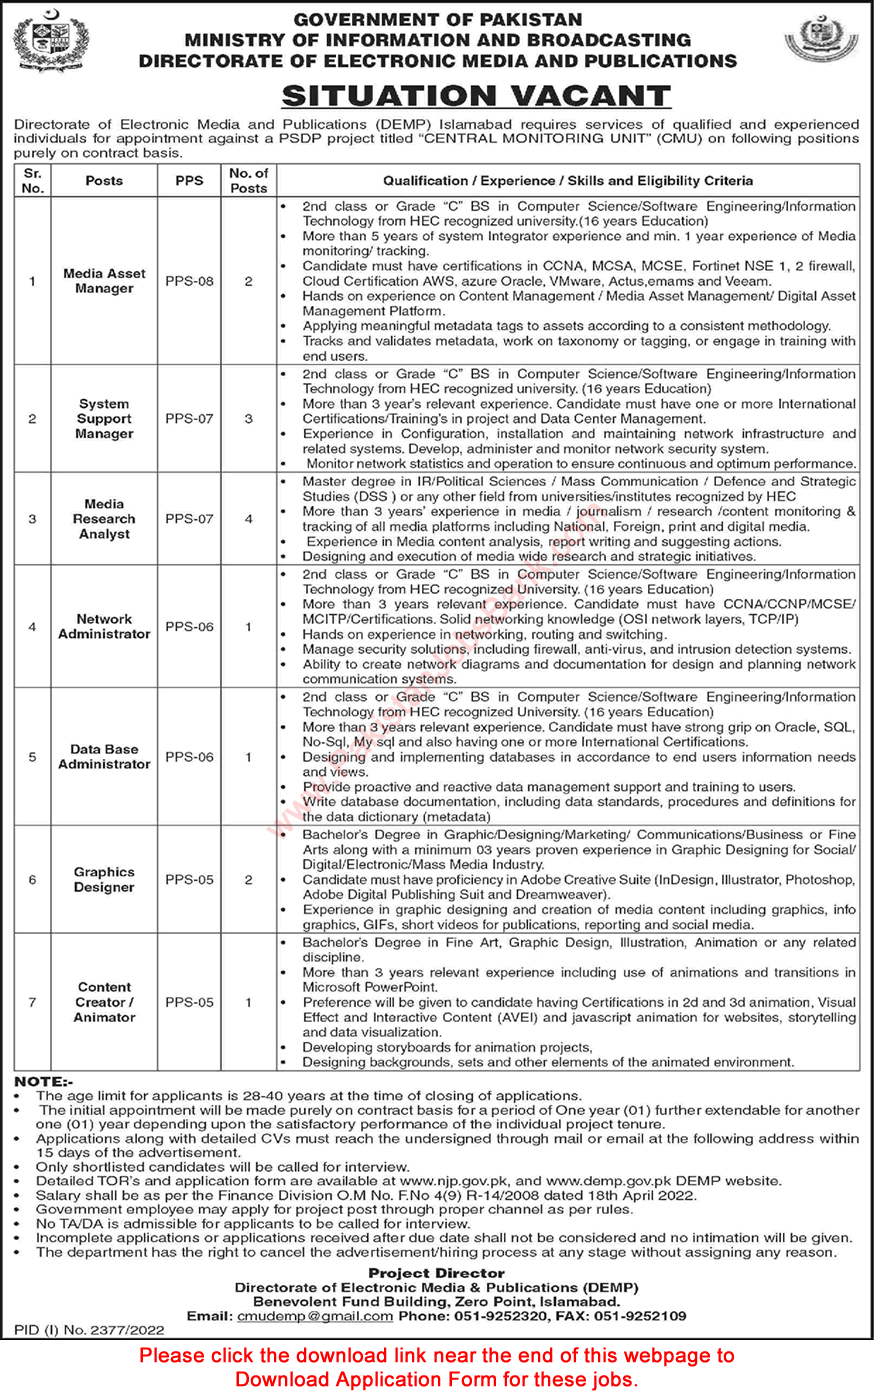 Directorate of Electronic Media and Publications Islamabad Jobs 2022 October Application Form DEMP Latest